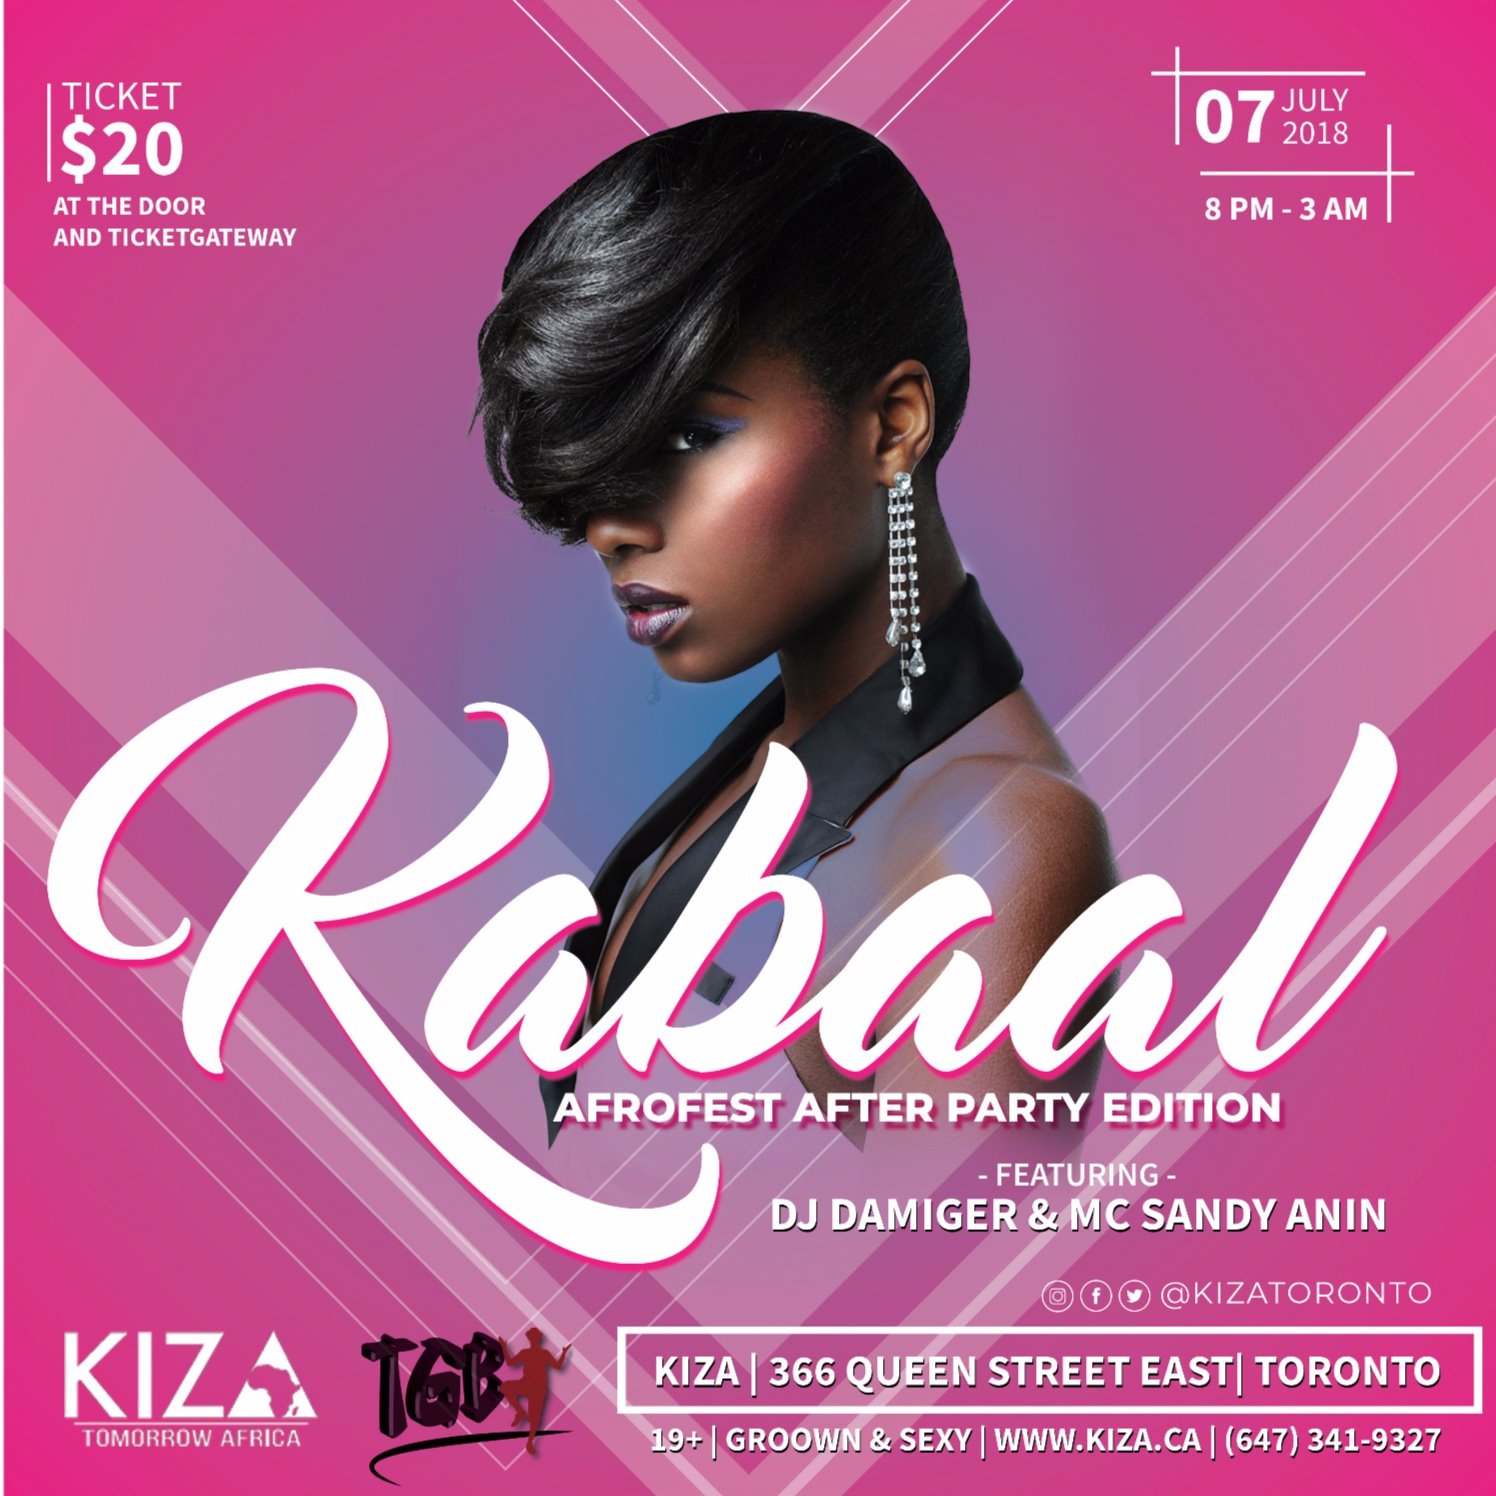 THE KABAAL - Afrofest After Party Edition